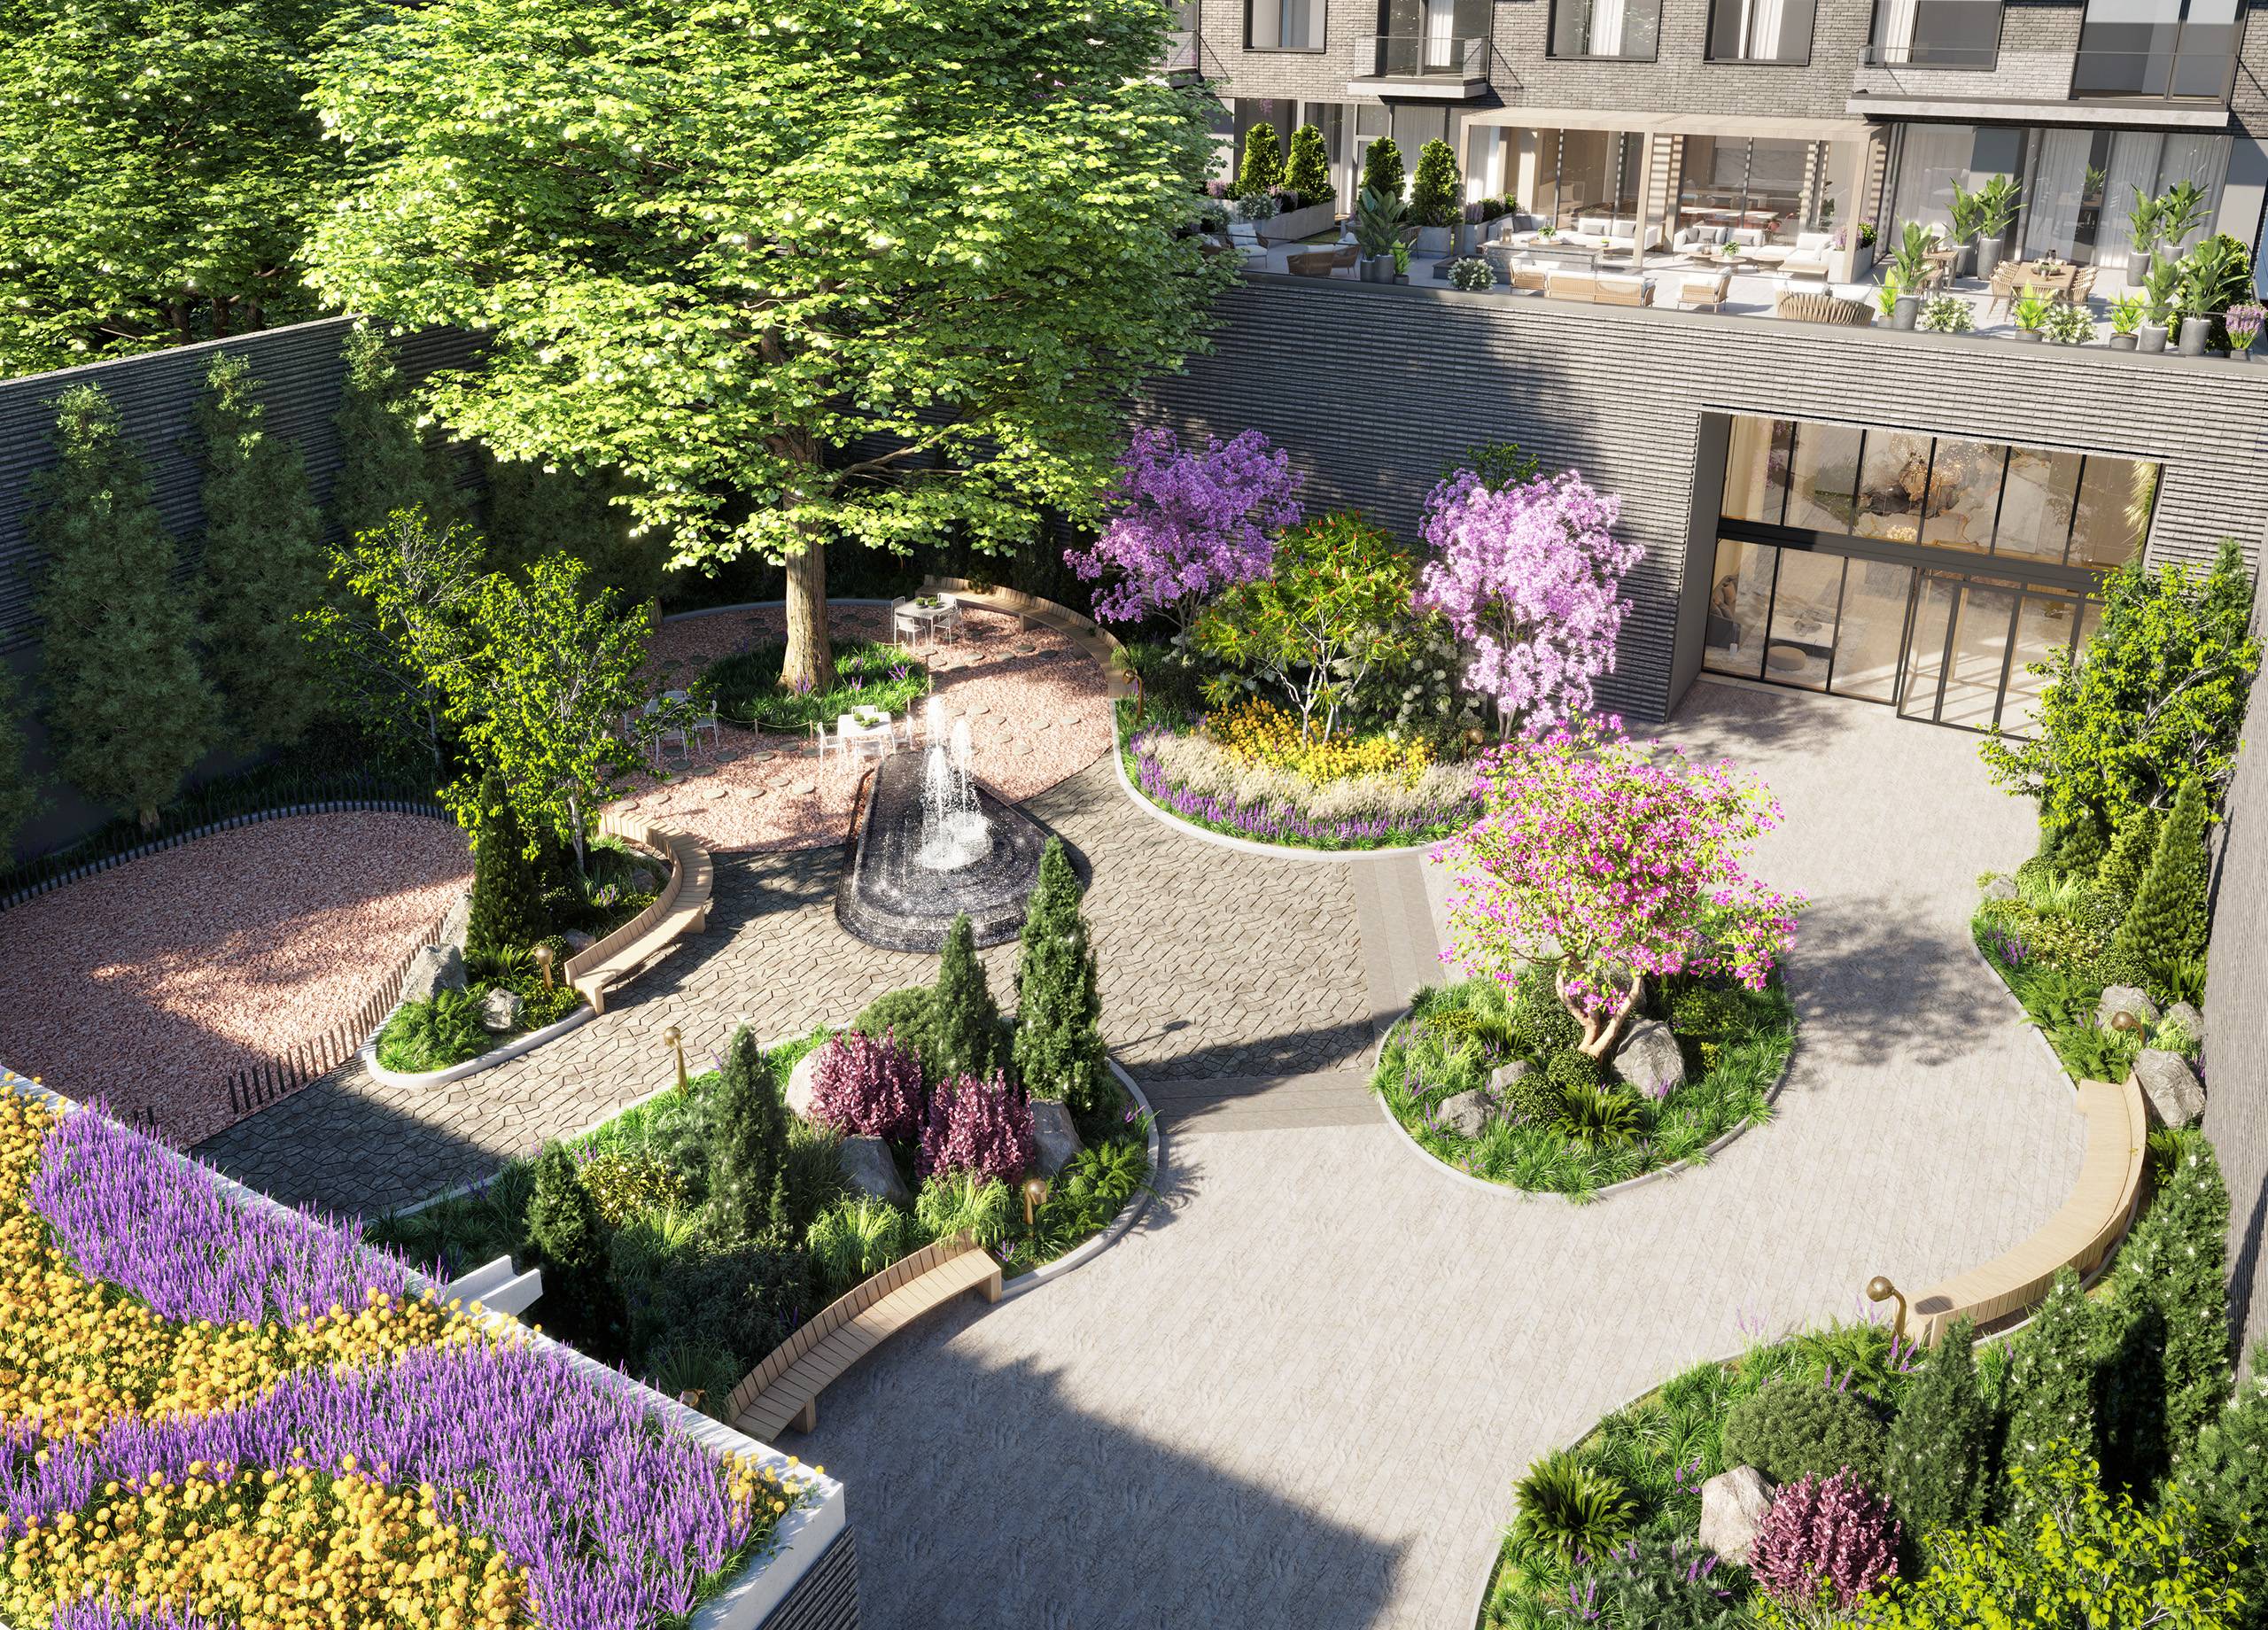 The Greene: Fully Amenitized Bespoke Condos in Court Square